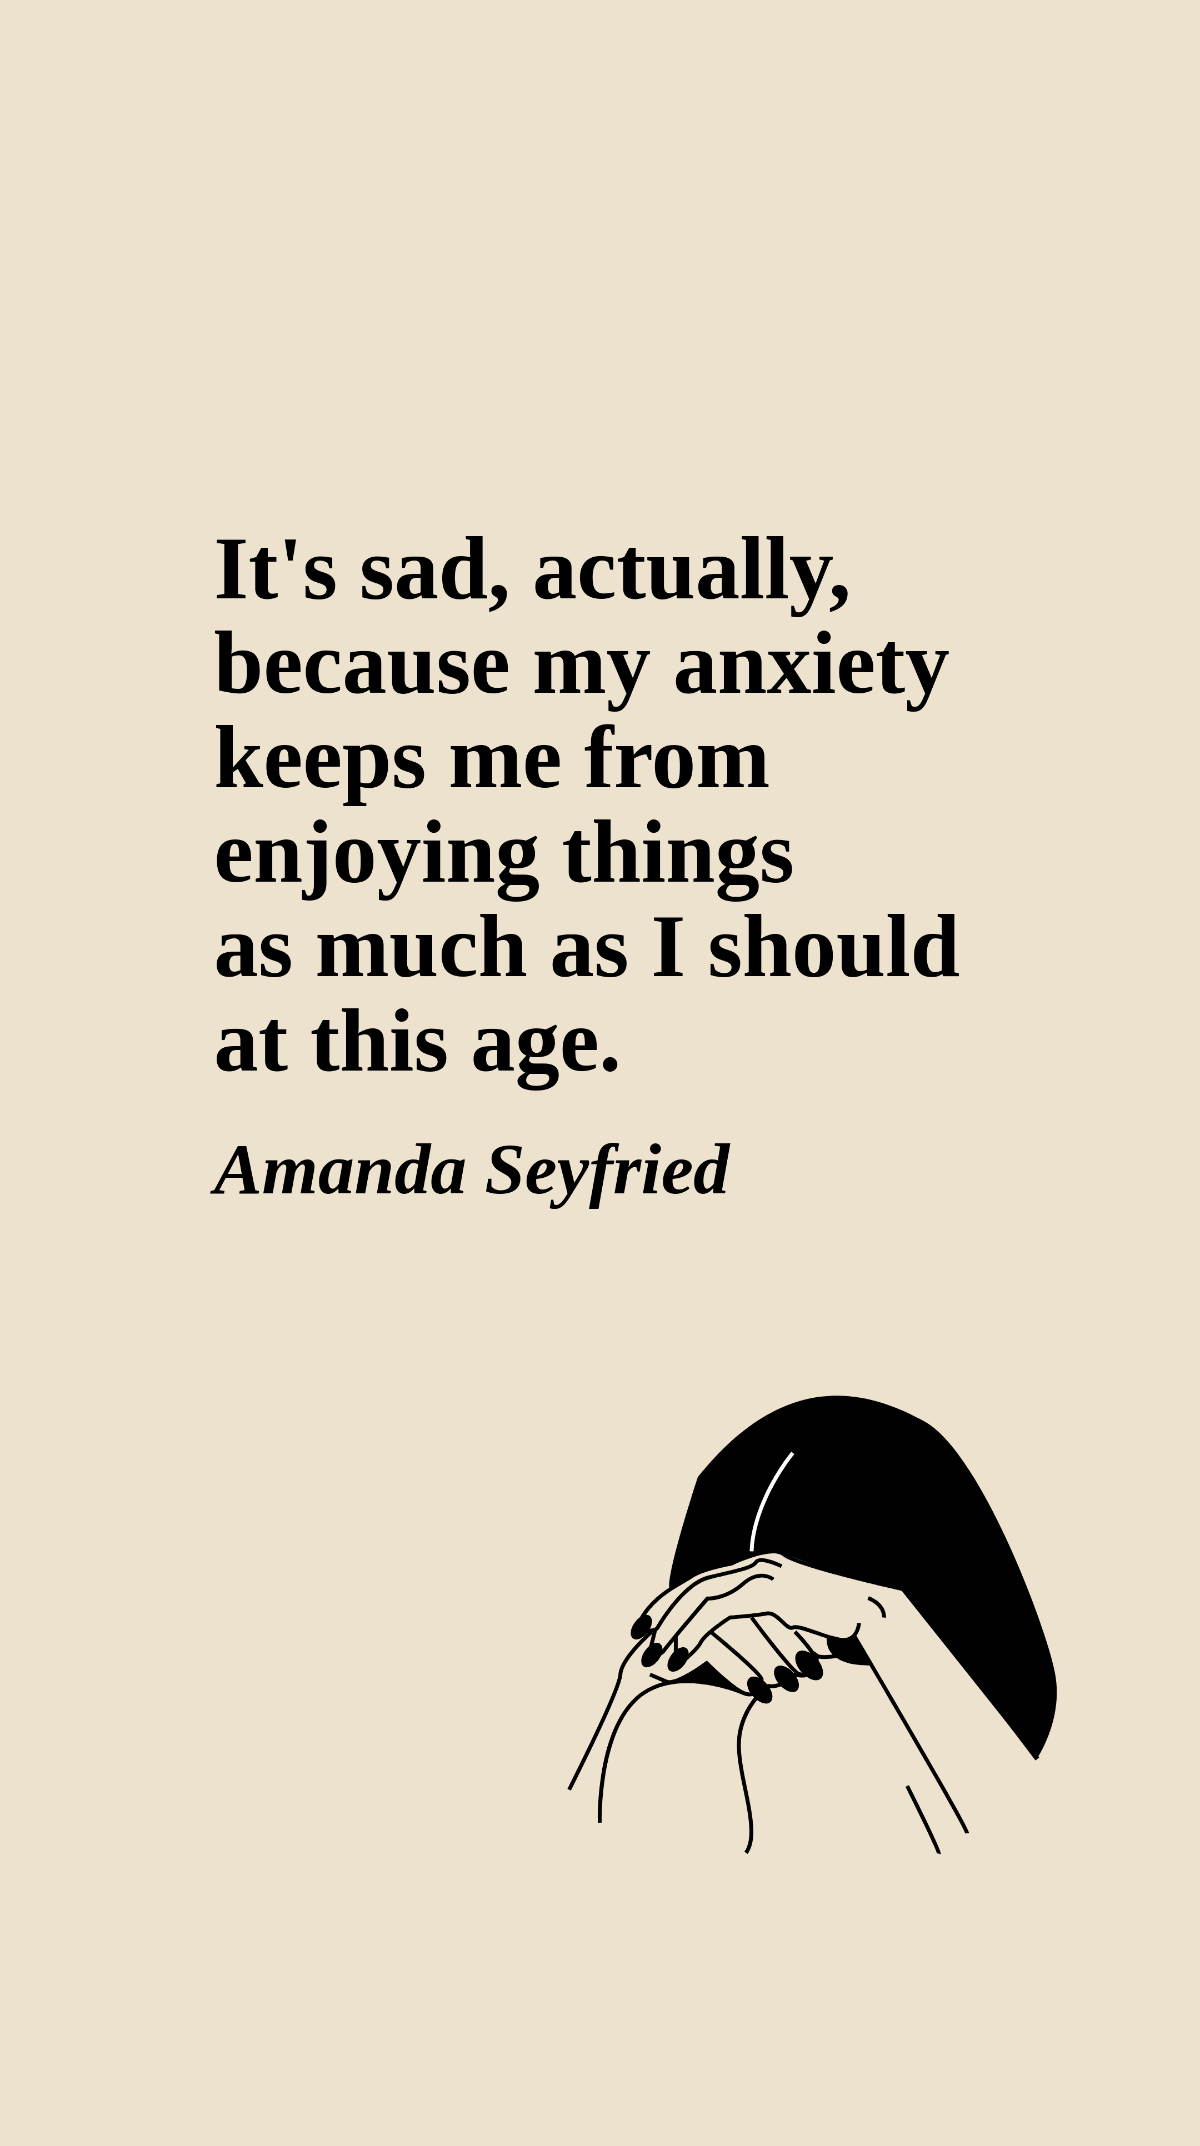 Amanda Seyfried - It's sad, actually, because my anxiety keeps me from enjoying things as much as I should at this age.